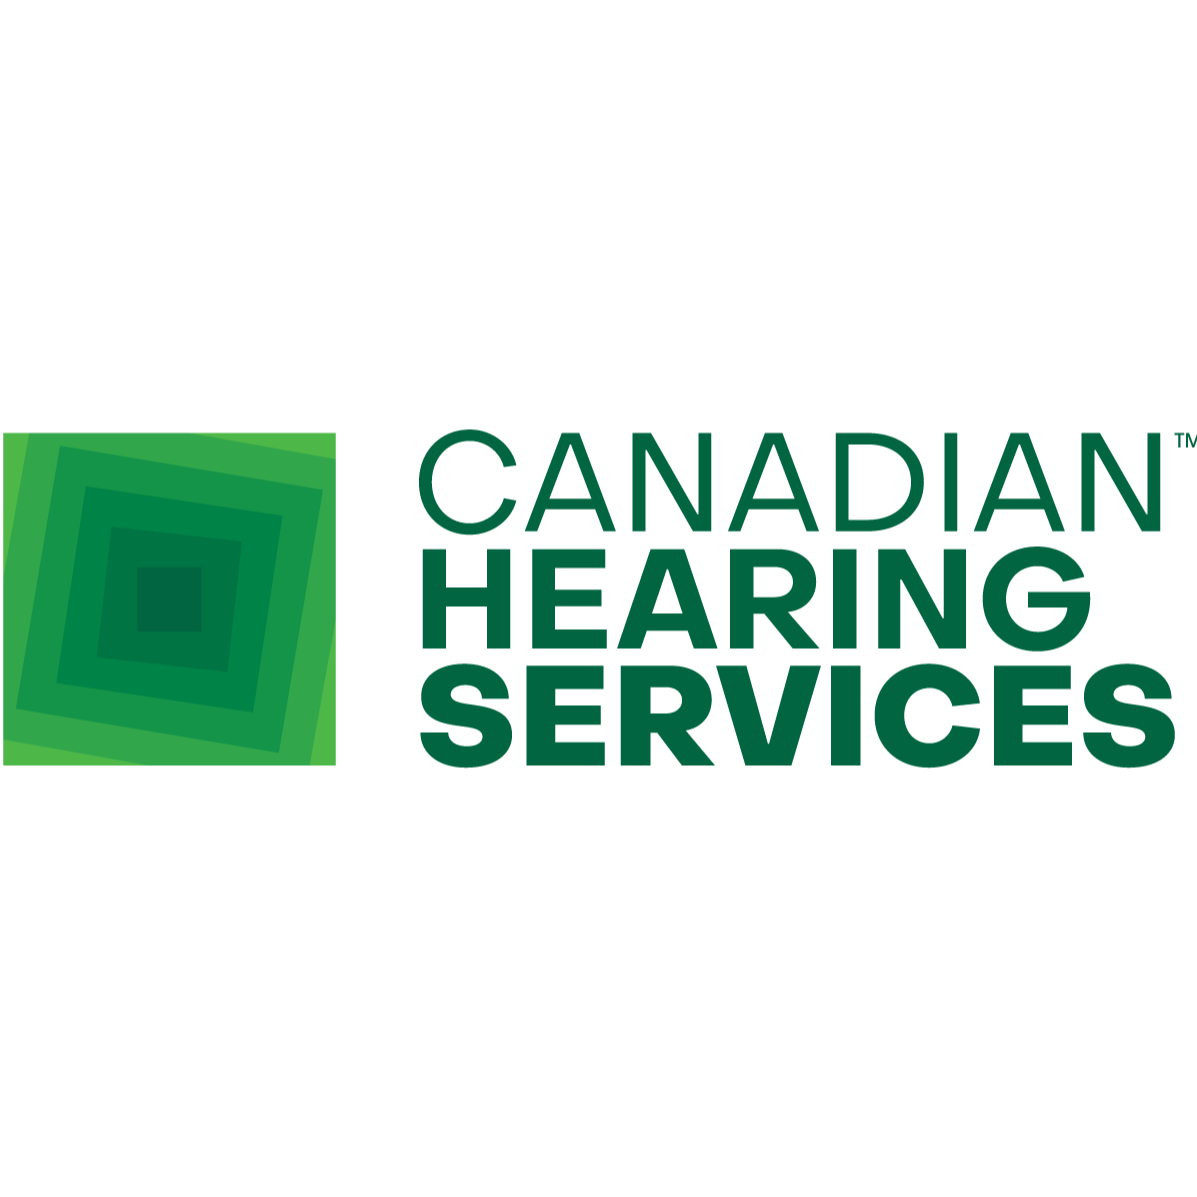 Canadian Hearing Services's logo